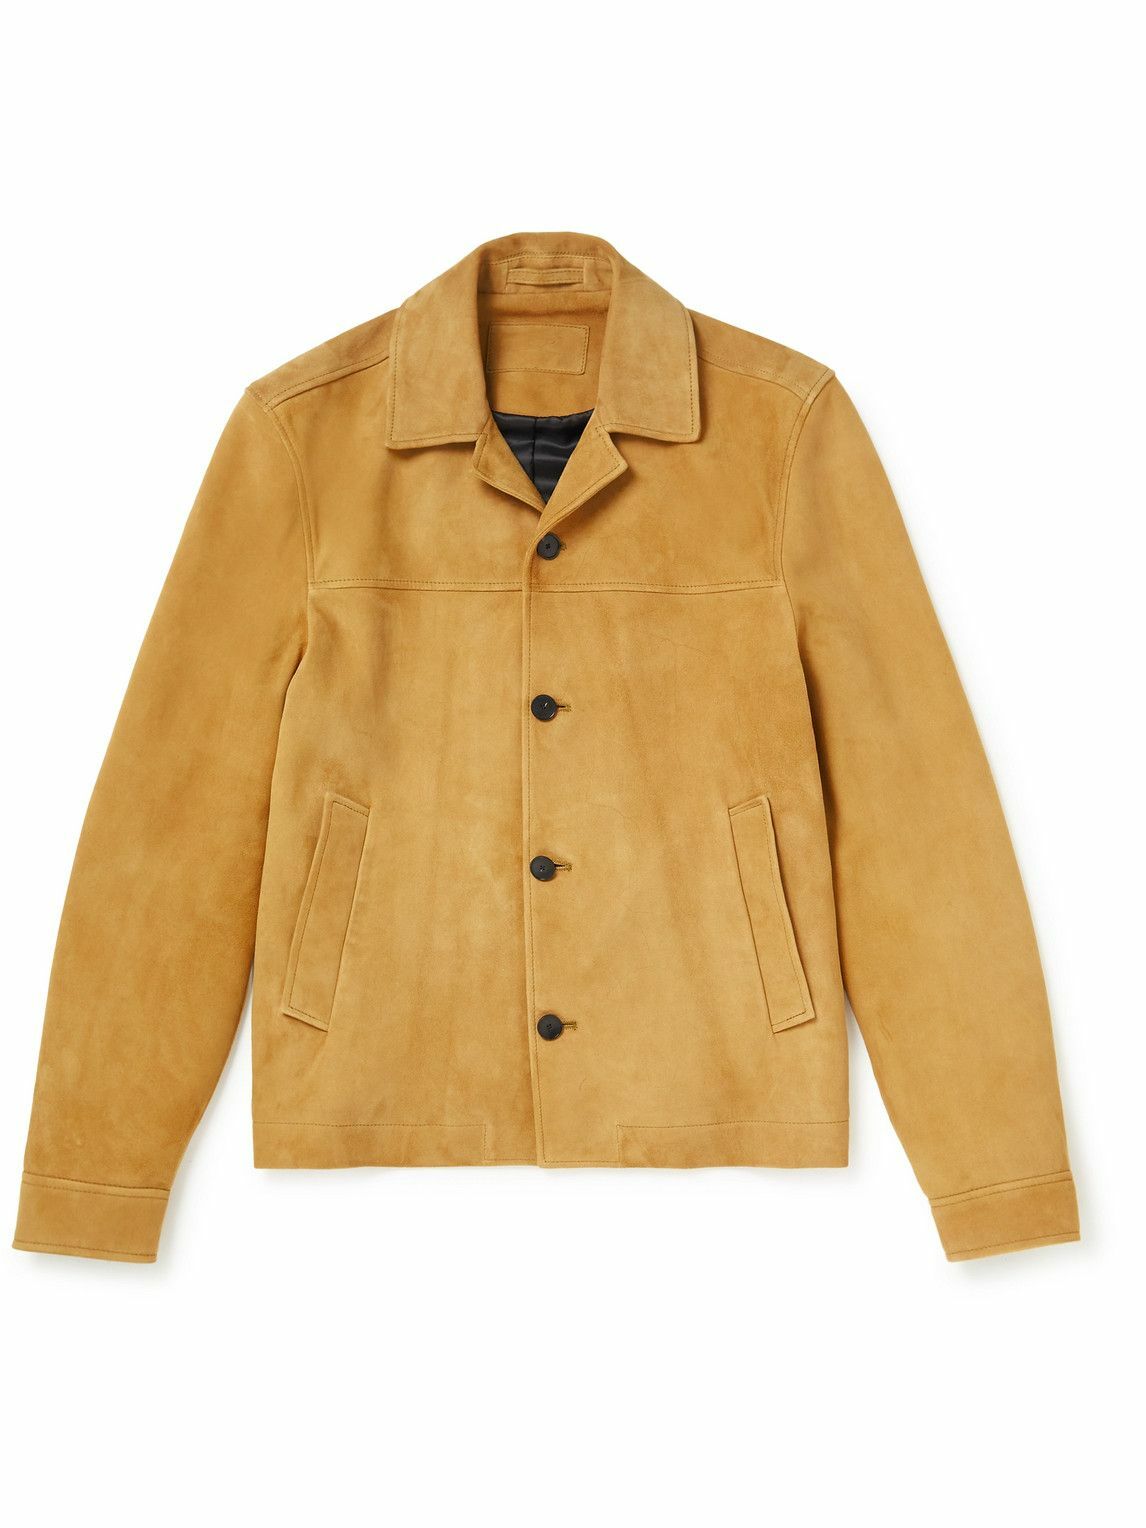 Mr P. - Suede Jacket - Yellow Mr P.